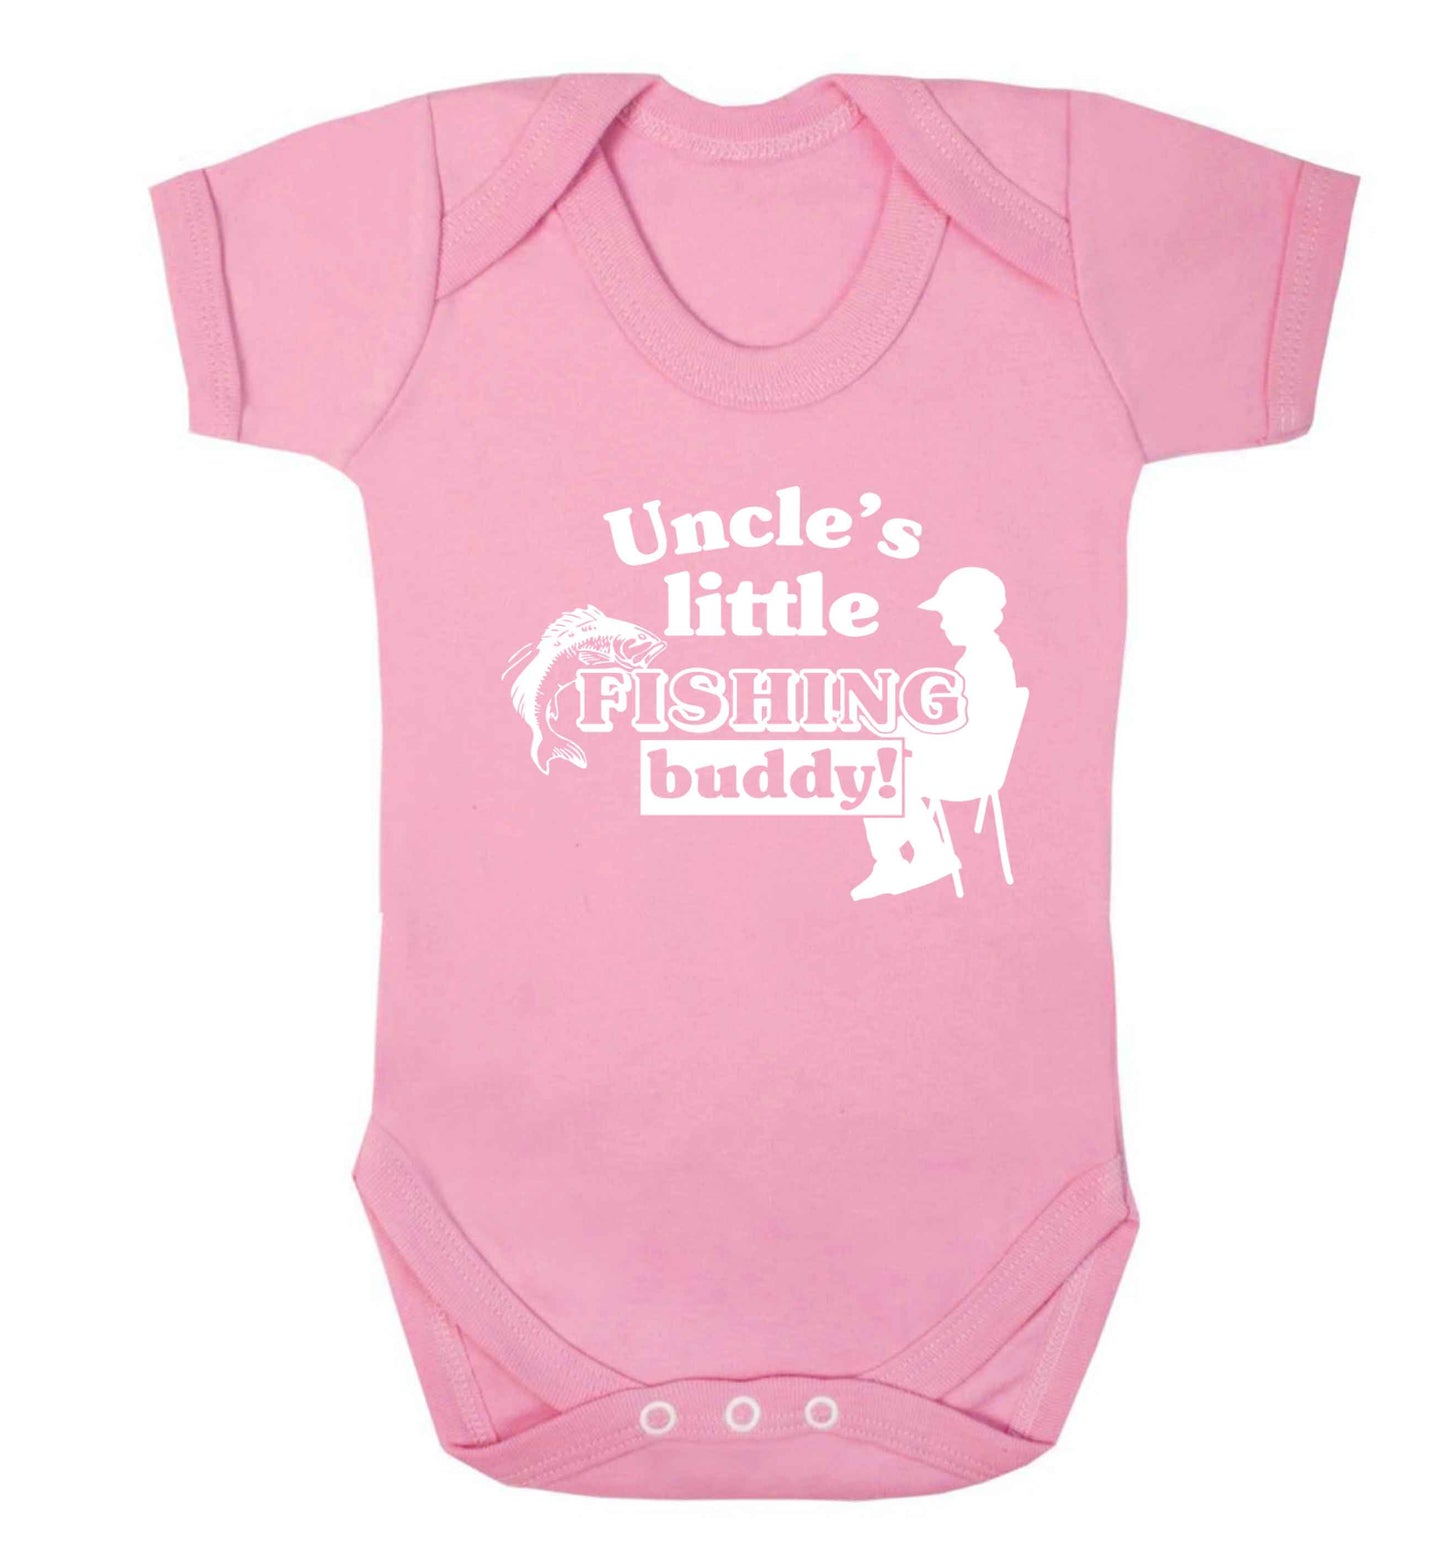 Uncle's little fishing buddy Baby Vest pale pink 18-24 months